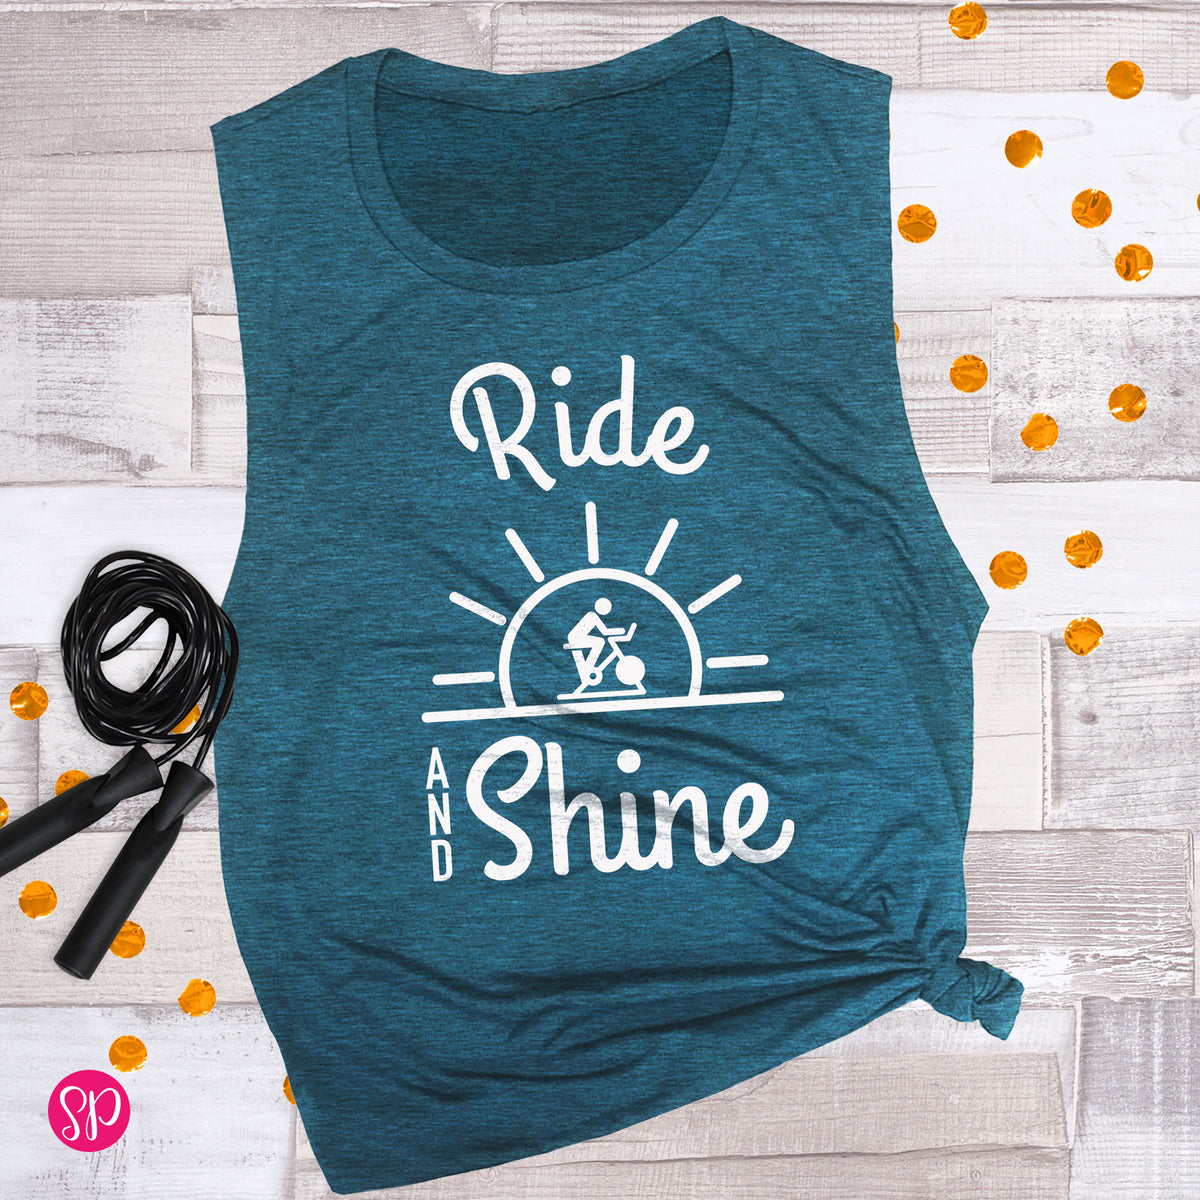 Ride and Shine Cycling Bike Spin Workout Fitness Graphic Muscle Tank Top Shirt Women